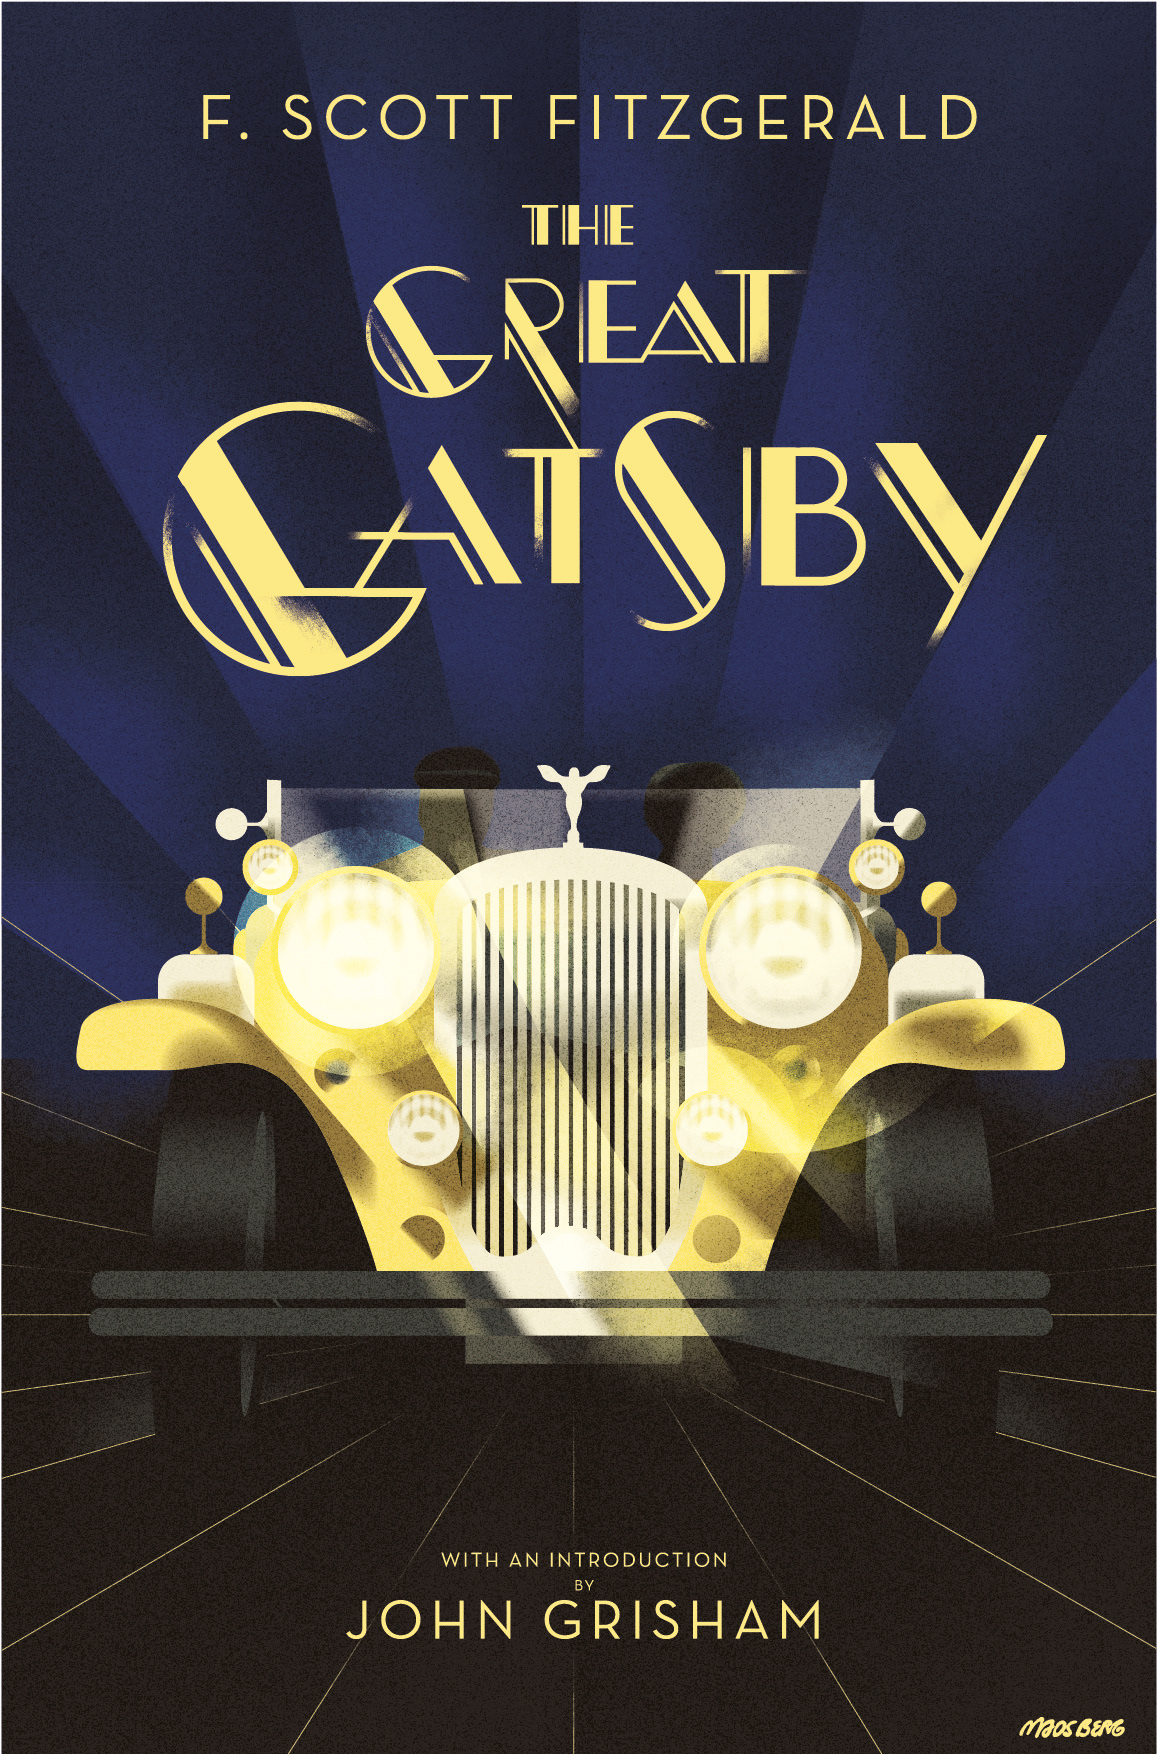 Mads Berg Illustration The Great Gatsby